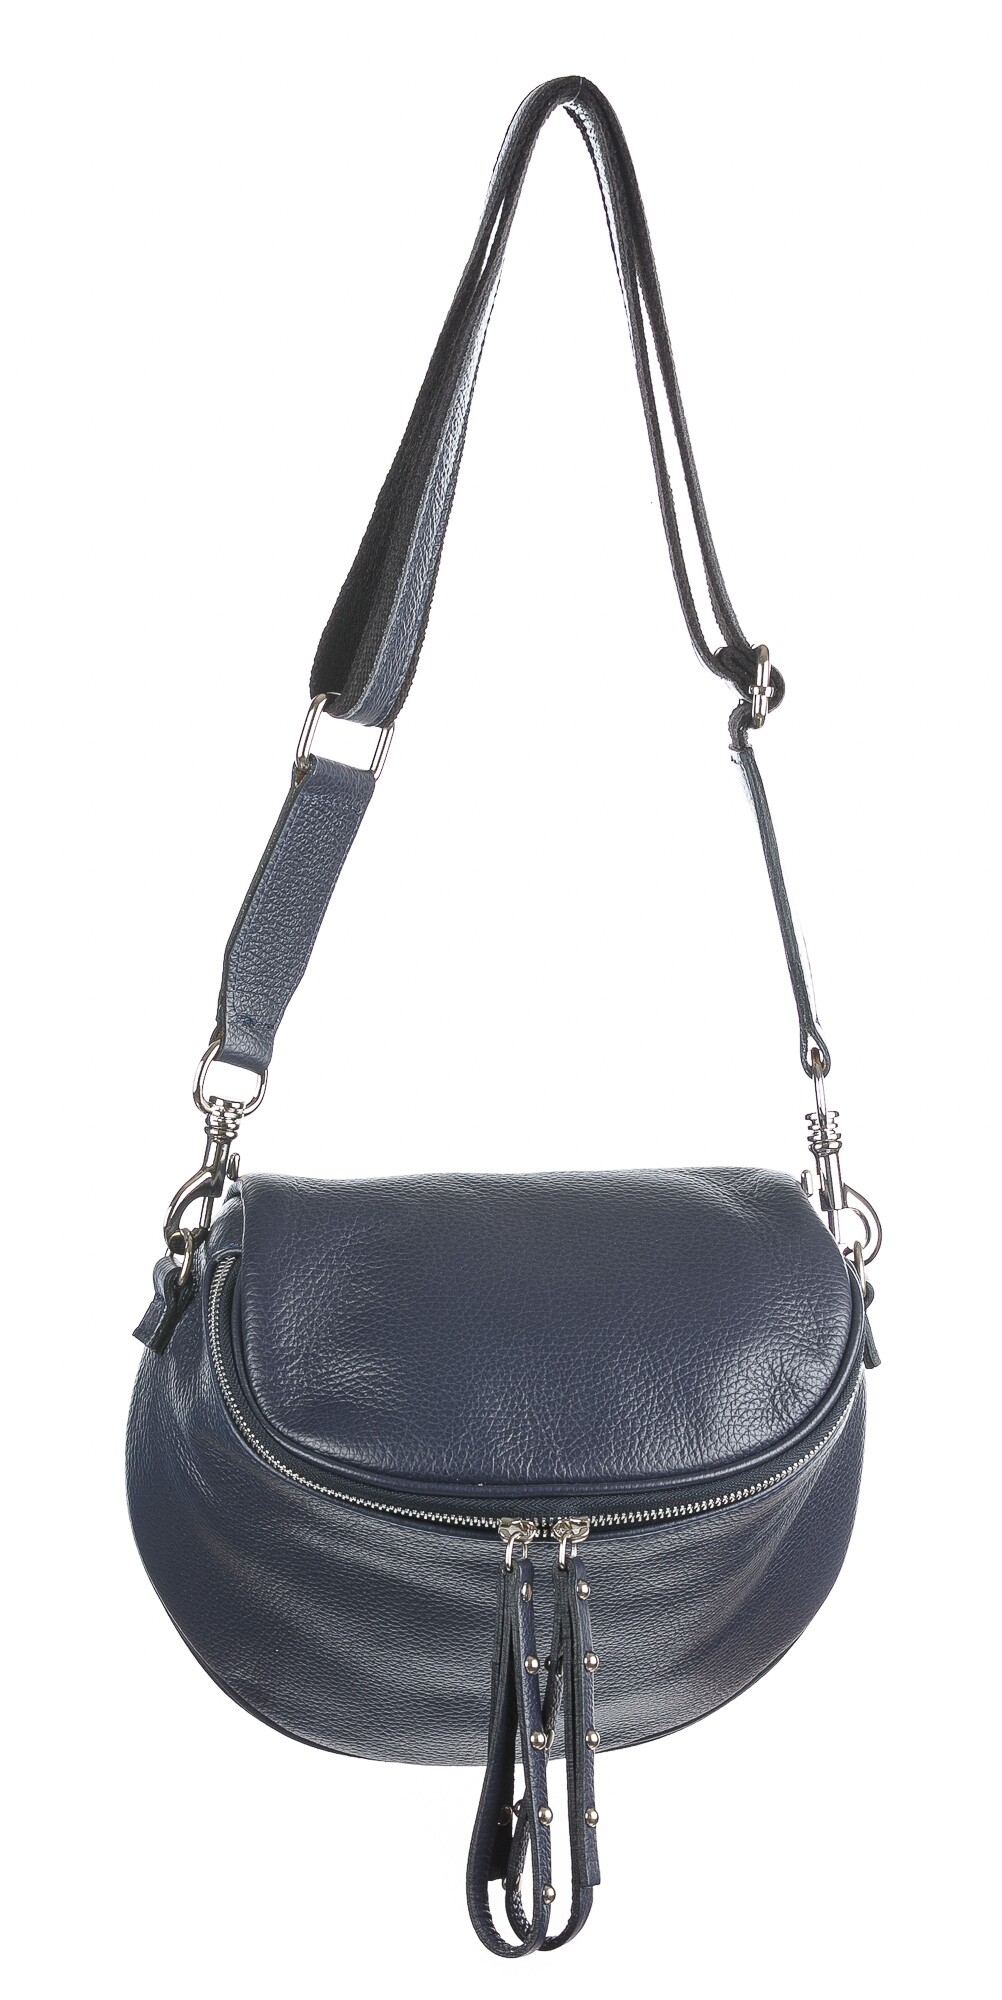 Crossbody bag for woman in genuine leather, EMILY, color blue, CHIAROSCURO,  Made in Italy, LADYS LEATHER BELT PACK